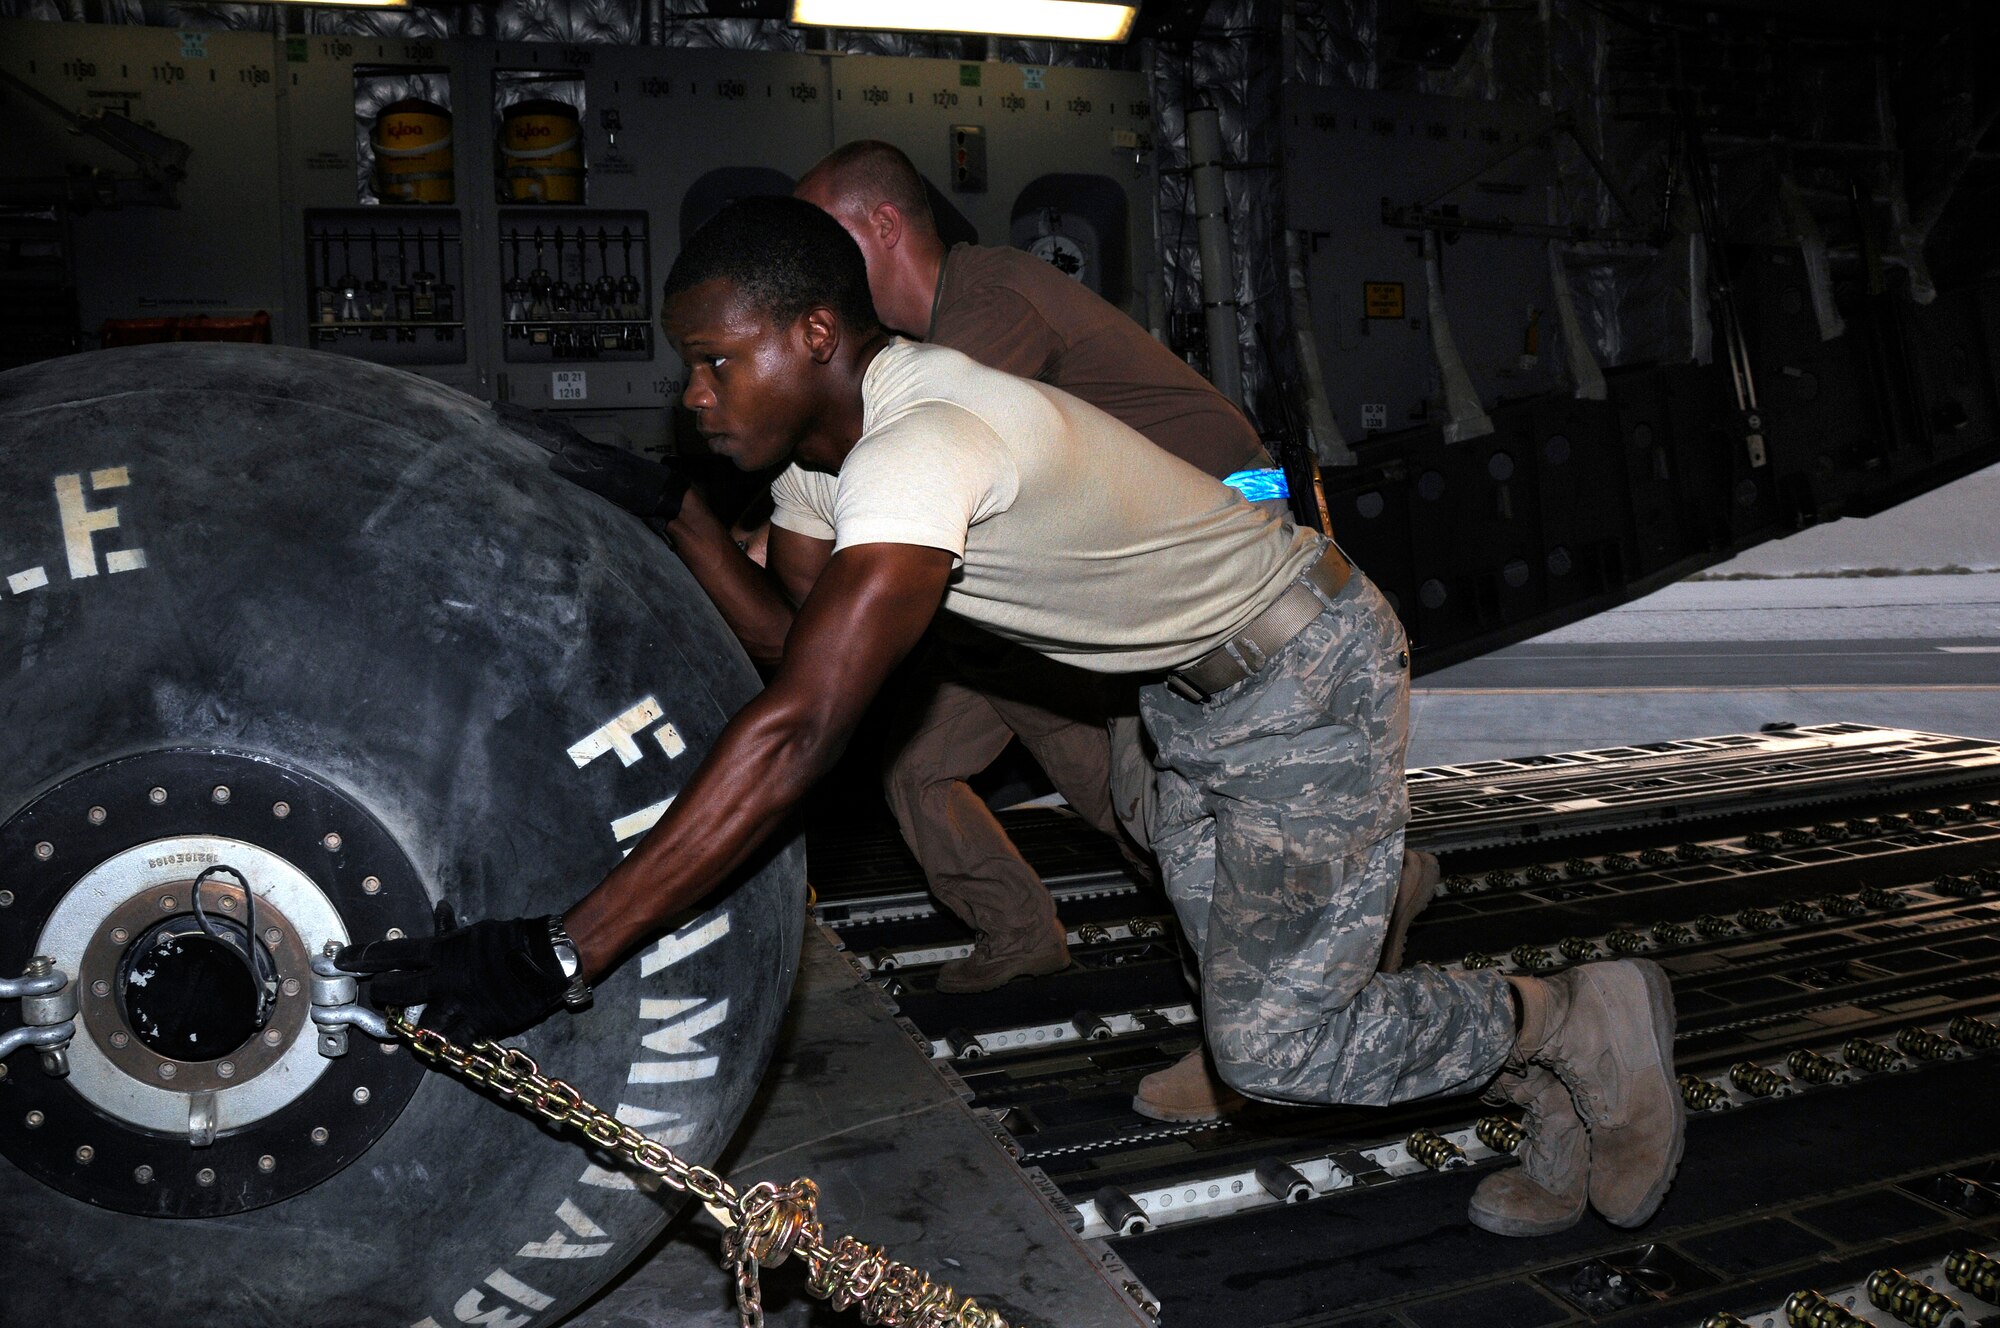 Airman 1st Class Micheal Coles, 8th Expeditionary Air Mobility Squadron (EAMS) from Charleston Air Force Base, S.C., helps move a heavy pallet into position on the C-17 Globemaster III at an undisclosed air base in Southwest Asia Aug. 8, 2008.  Airmen Coles, along with other EAMS personnel and C-17 aircrew, work together to load pallets of equipment and supplies for delivery up range in support of Operations Iraqi Freedom and Enduring Freedom.  (U.S. Air Force photo by Tech. Sgt. Michael Boquette/Released)